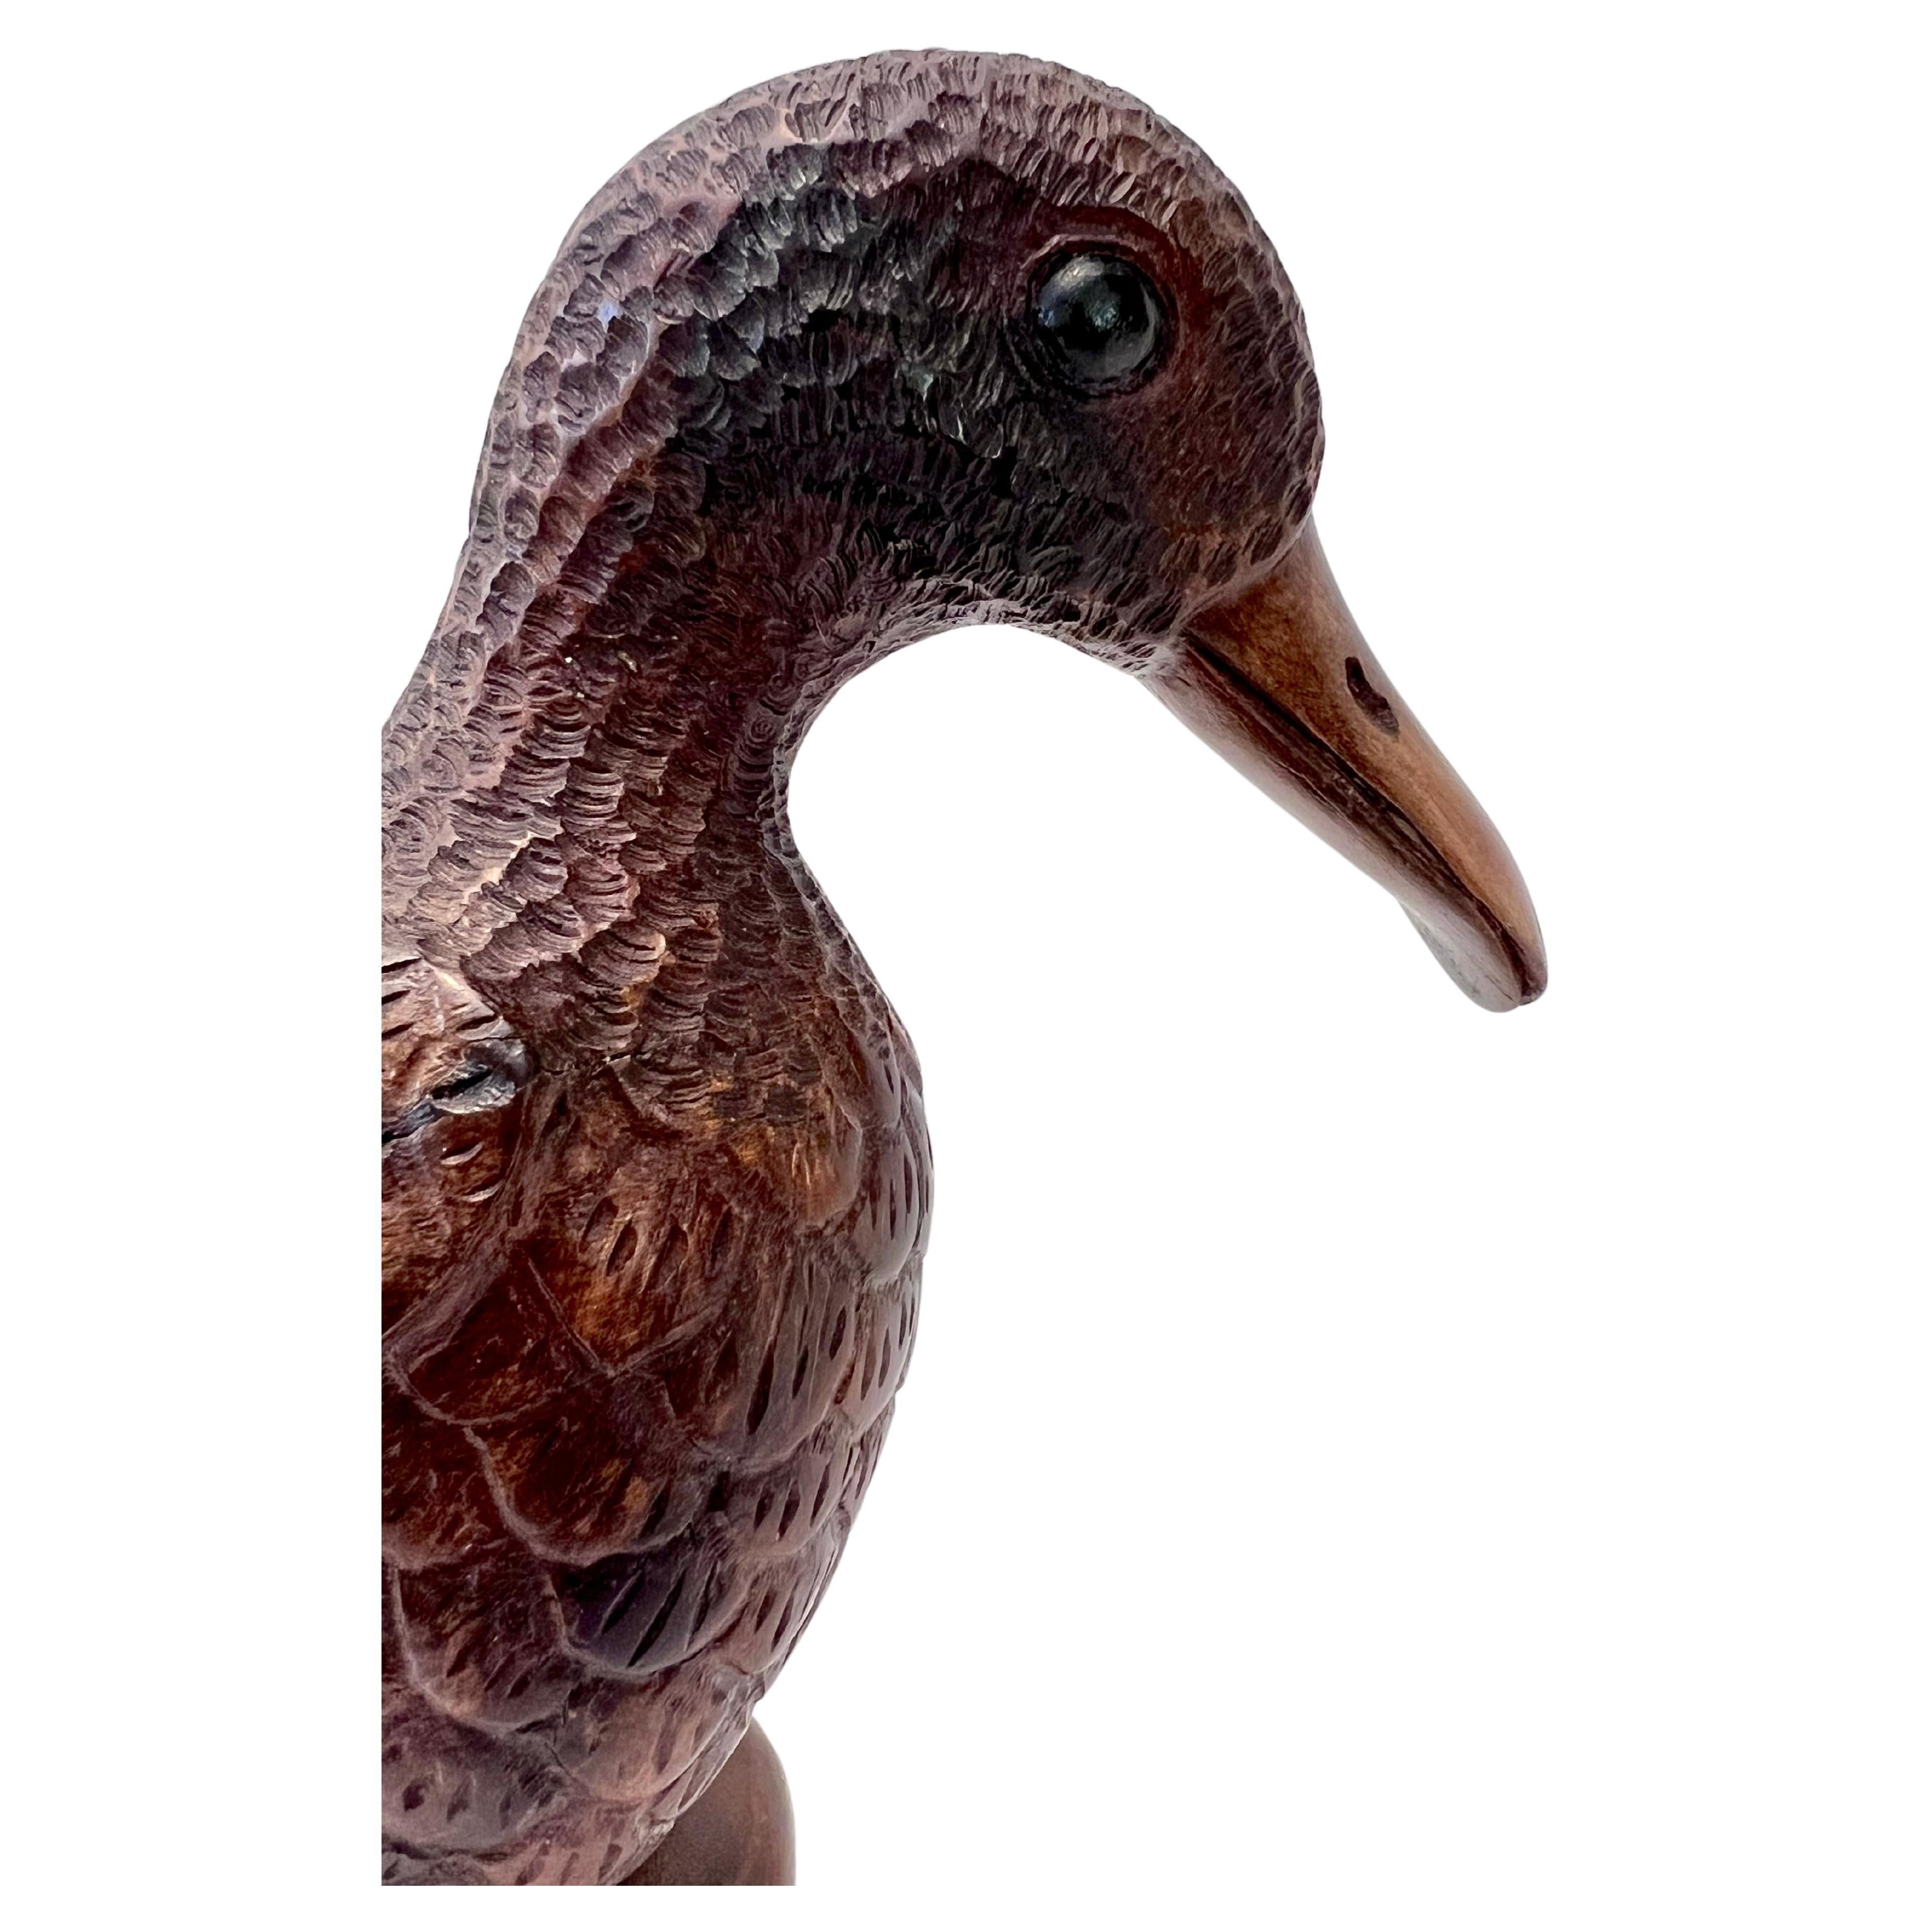 Hand Carved Duck Sculpture from DriftWood For Sale 3